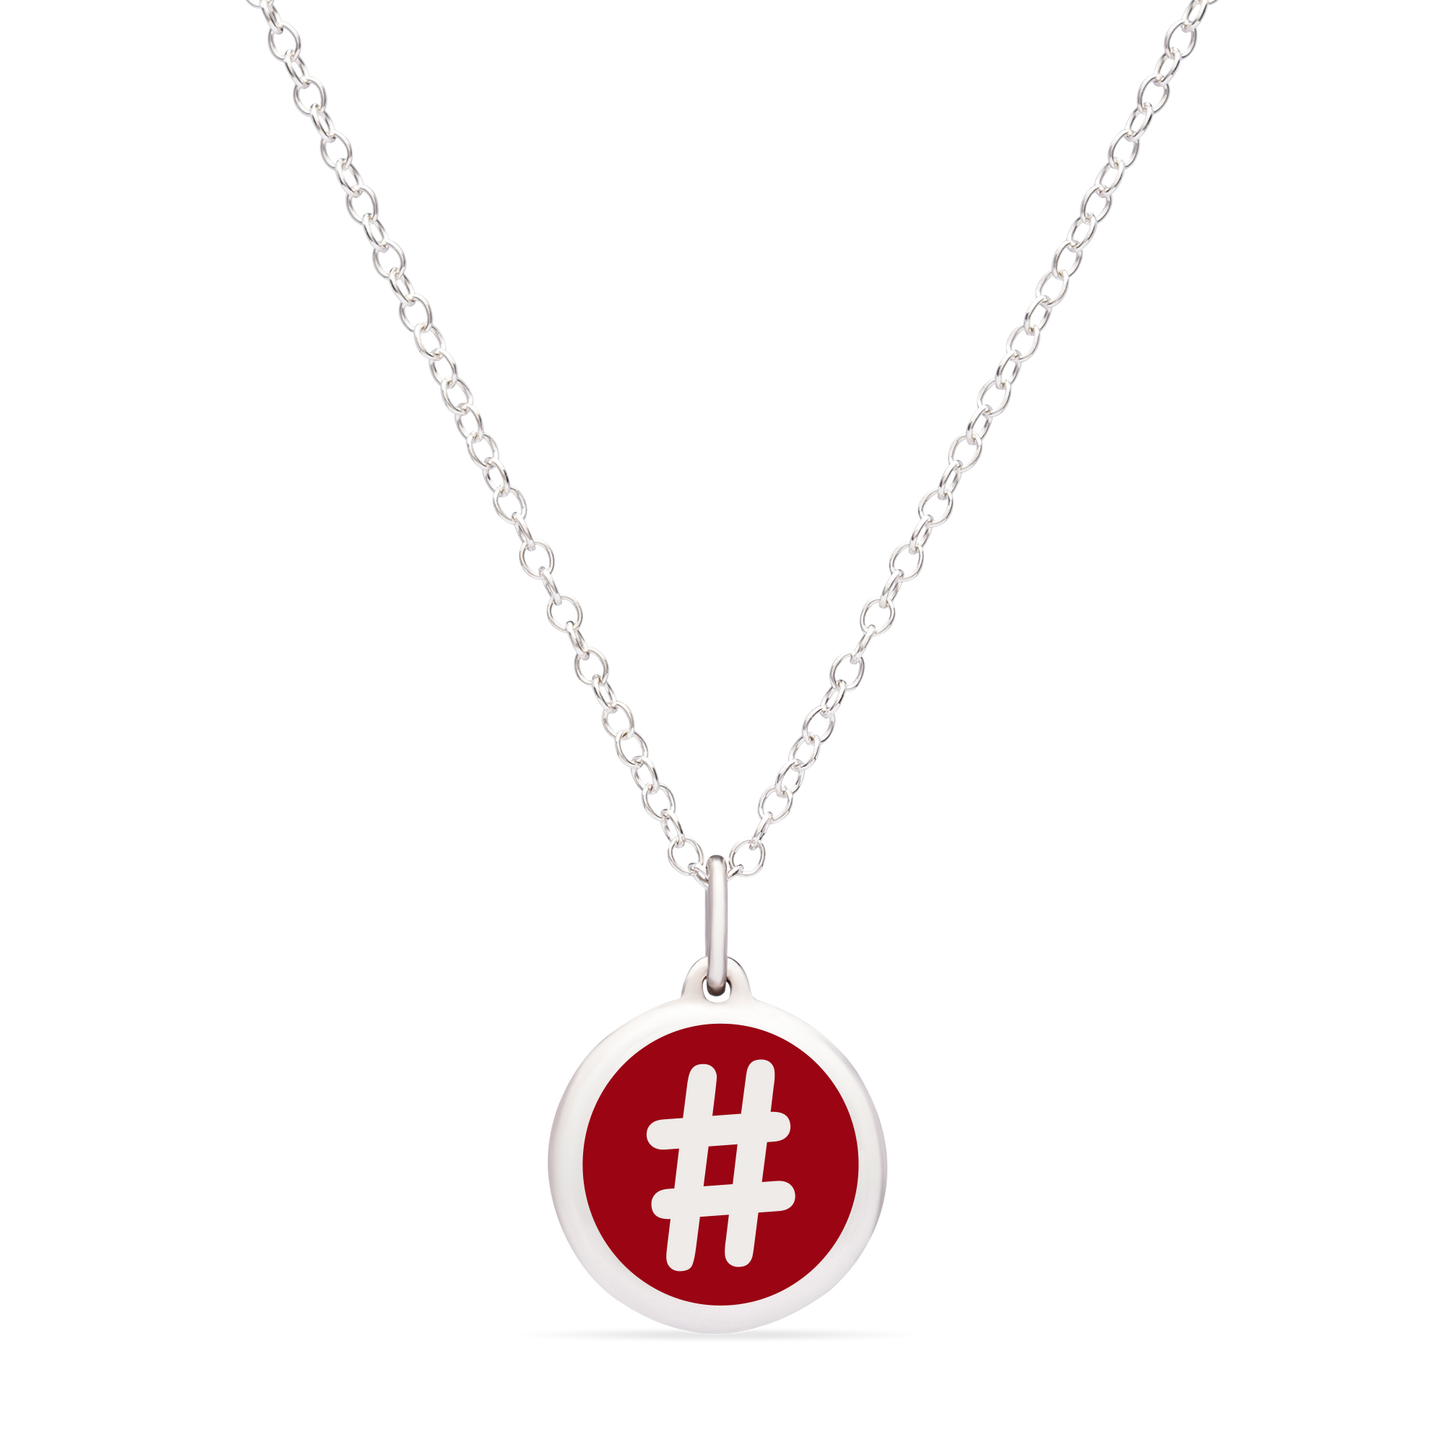 MINI HASHTAG CHARM sterling silver with rhodium plate